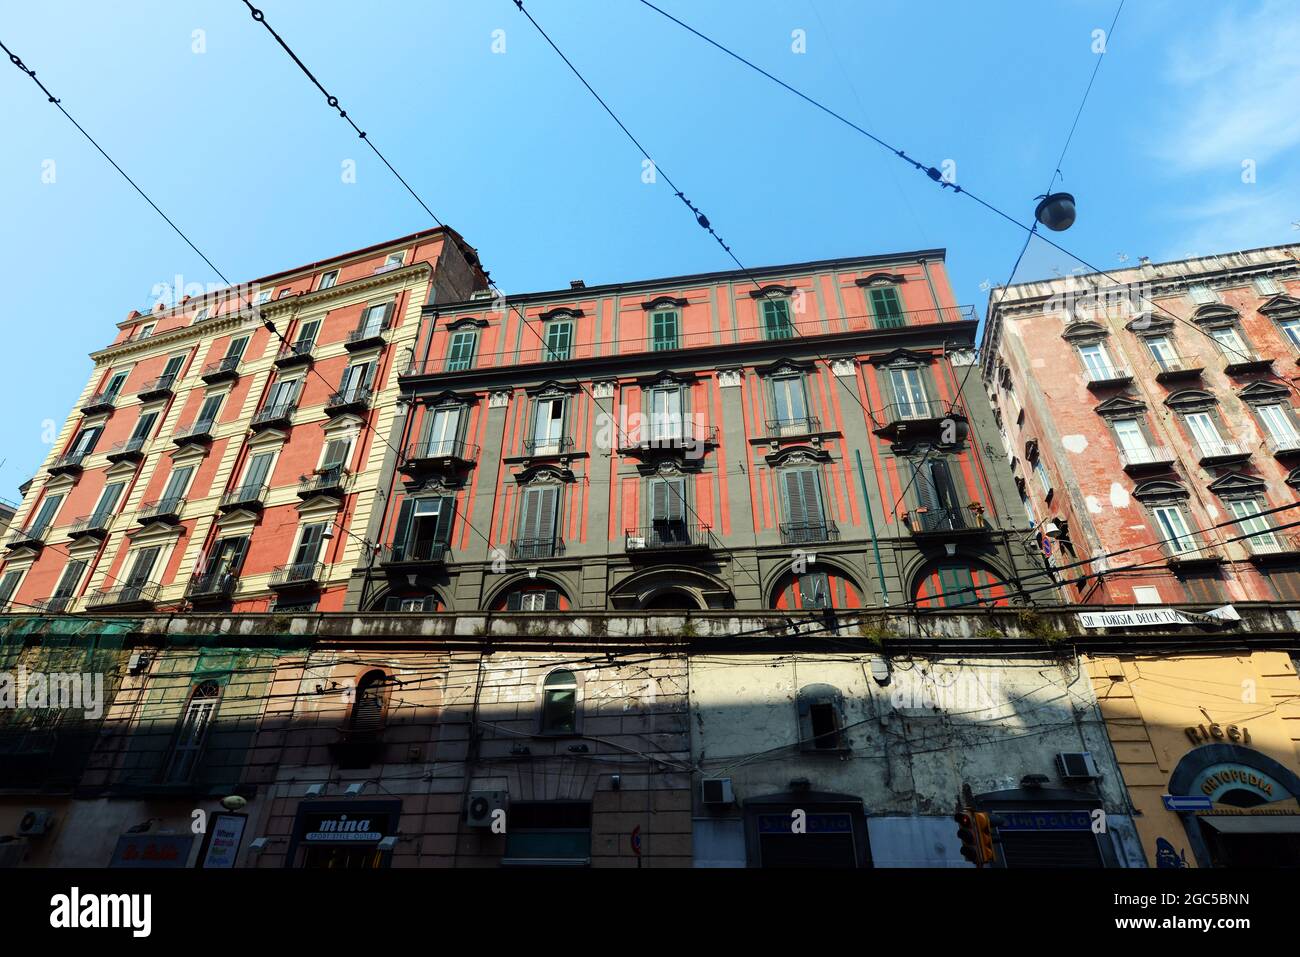 A beautiful old building by the Piazza Museo in Naples, Italy. Stock Photo